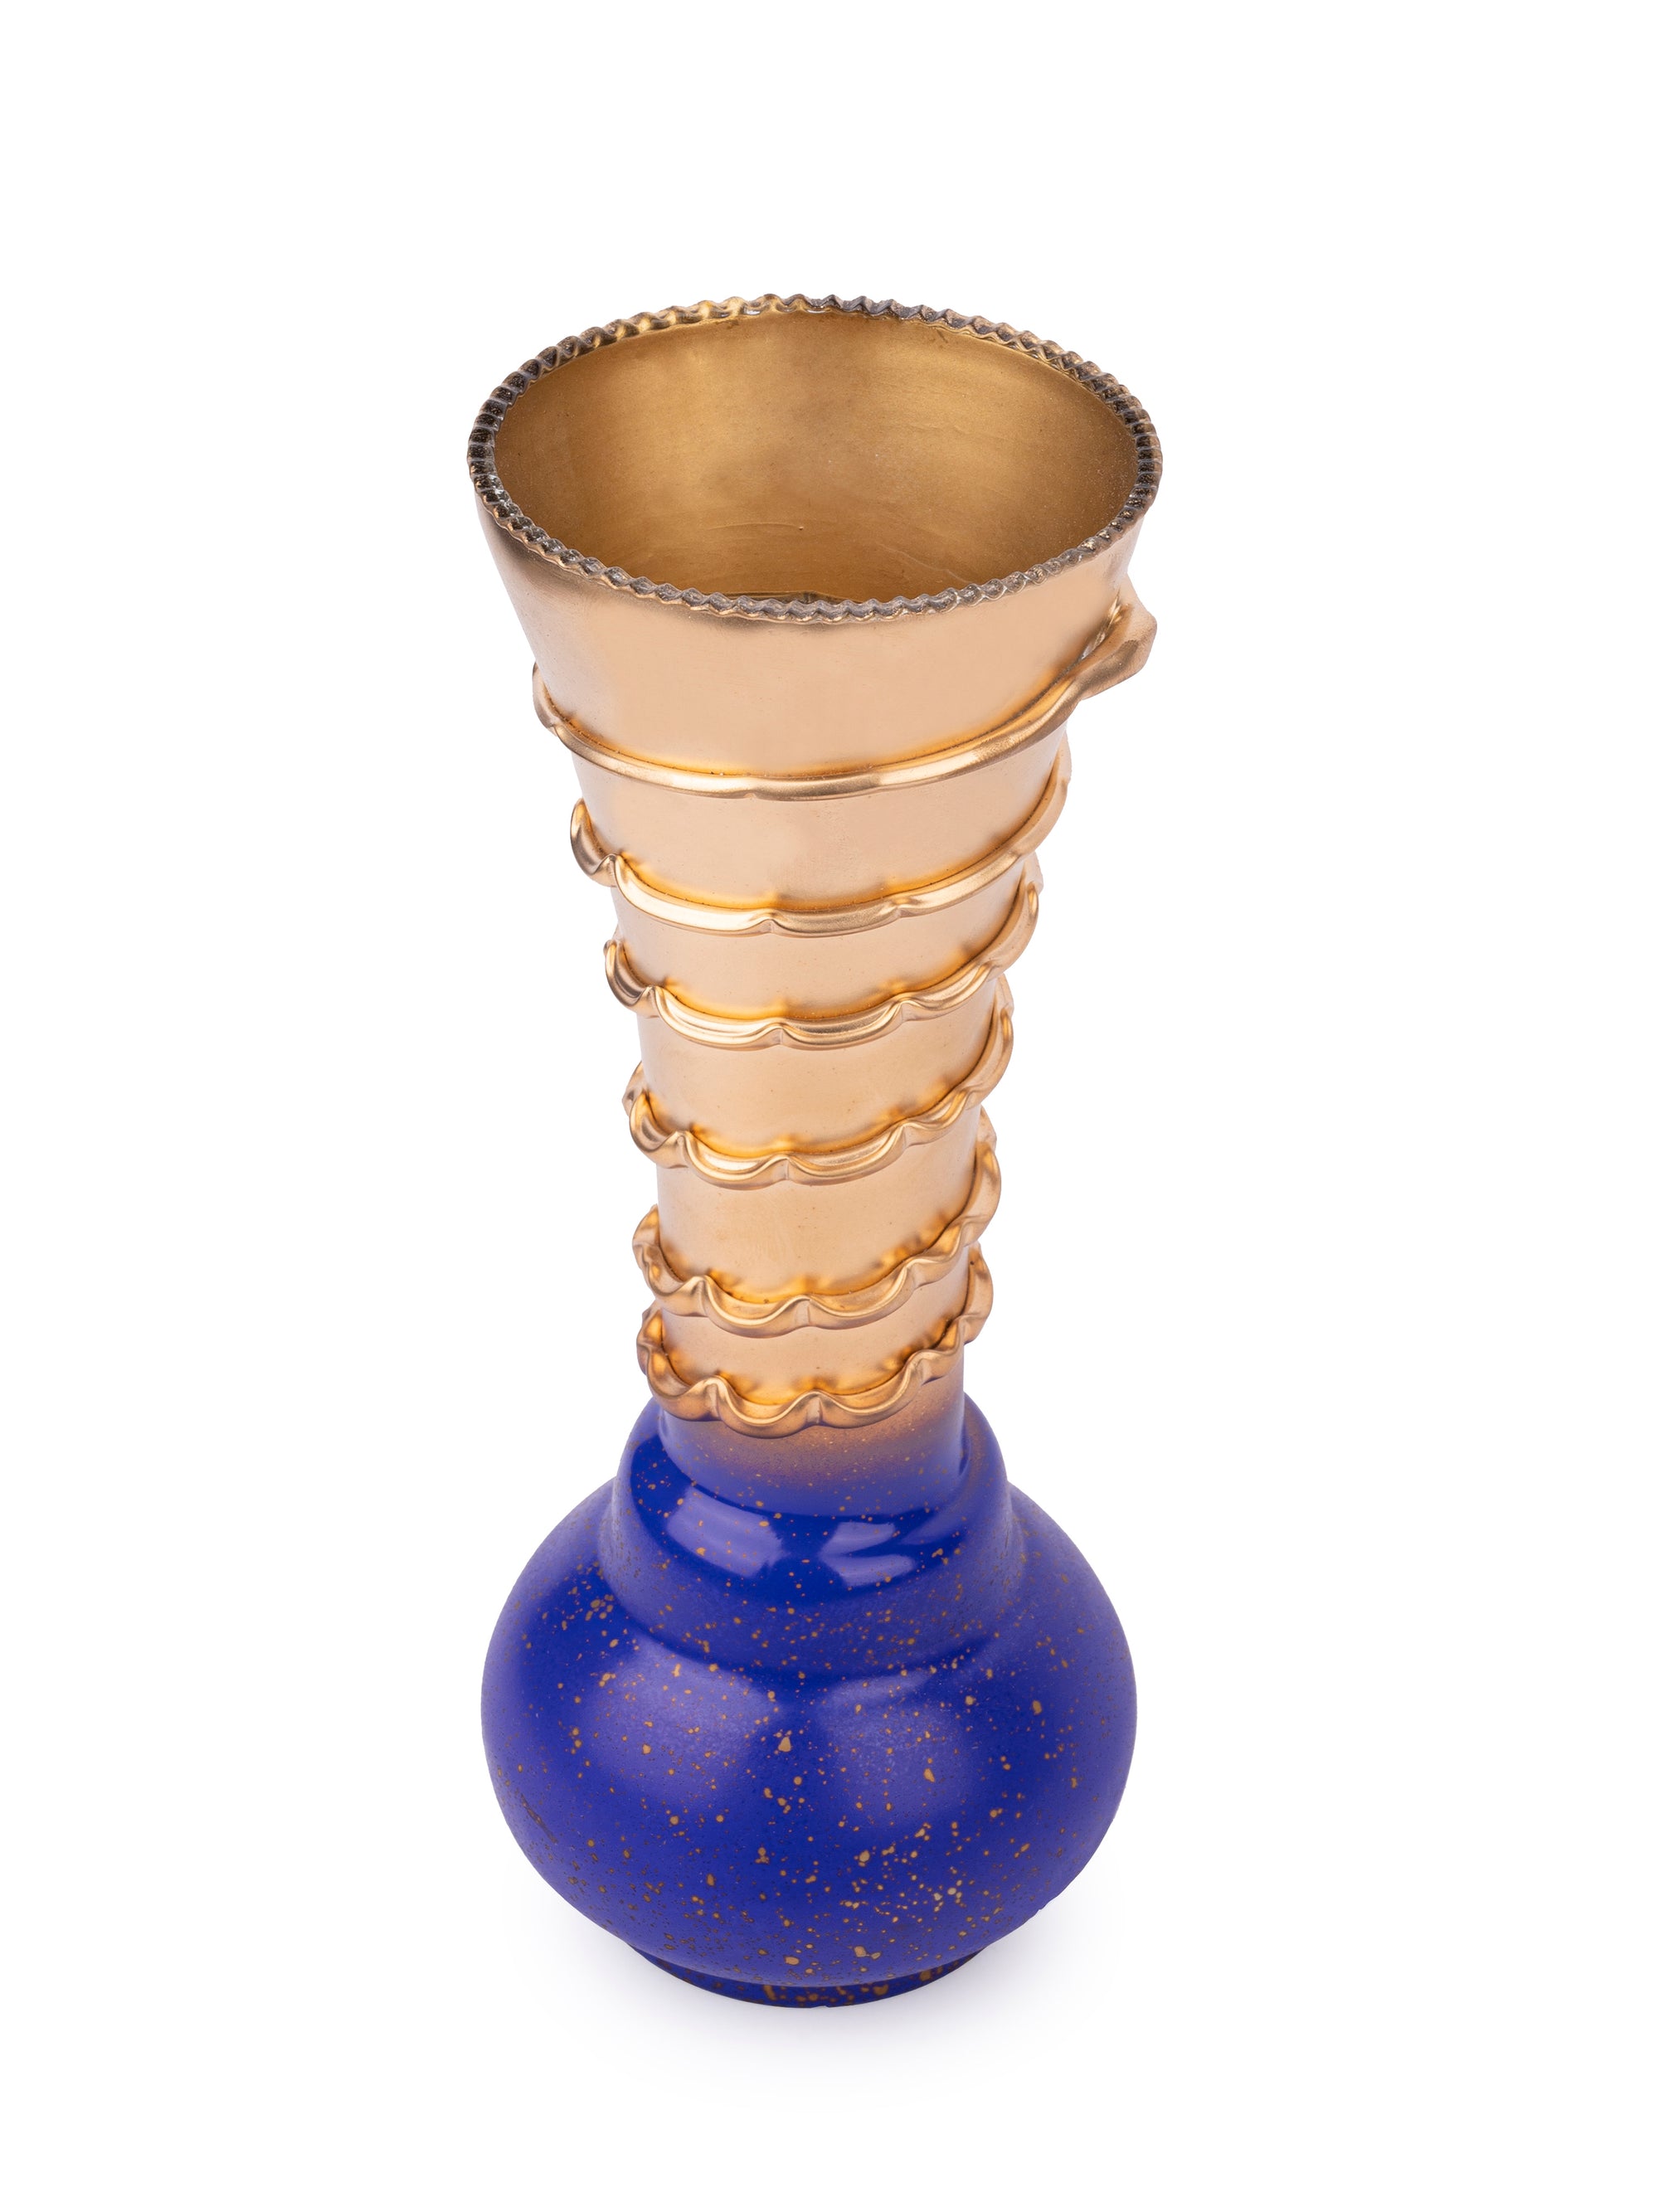 Glass Crafted Gold and Blue Spiral Design Flower Vase - 11 inches height - The Heritage Artifacts